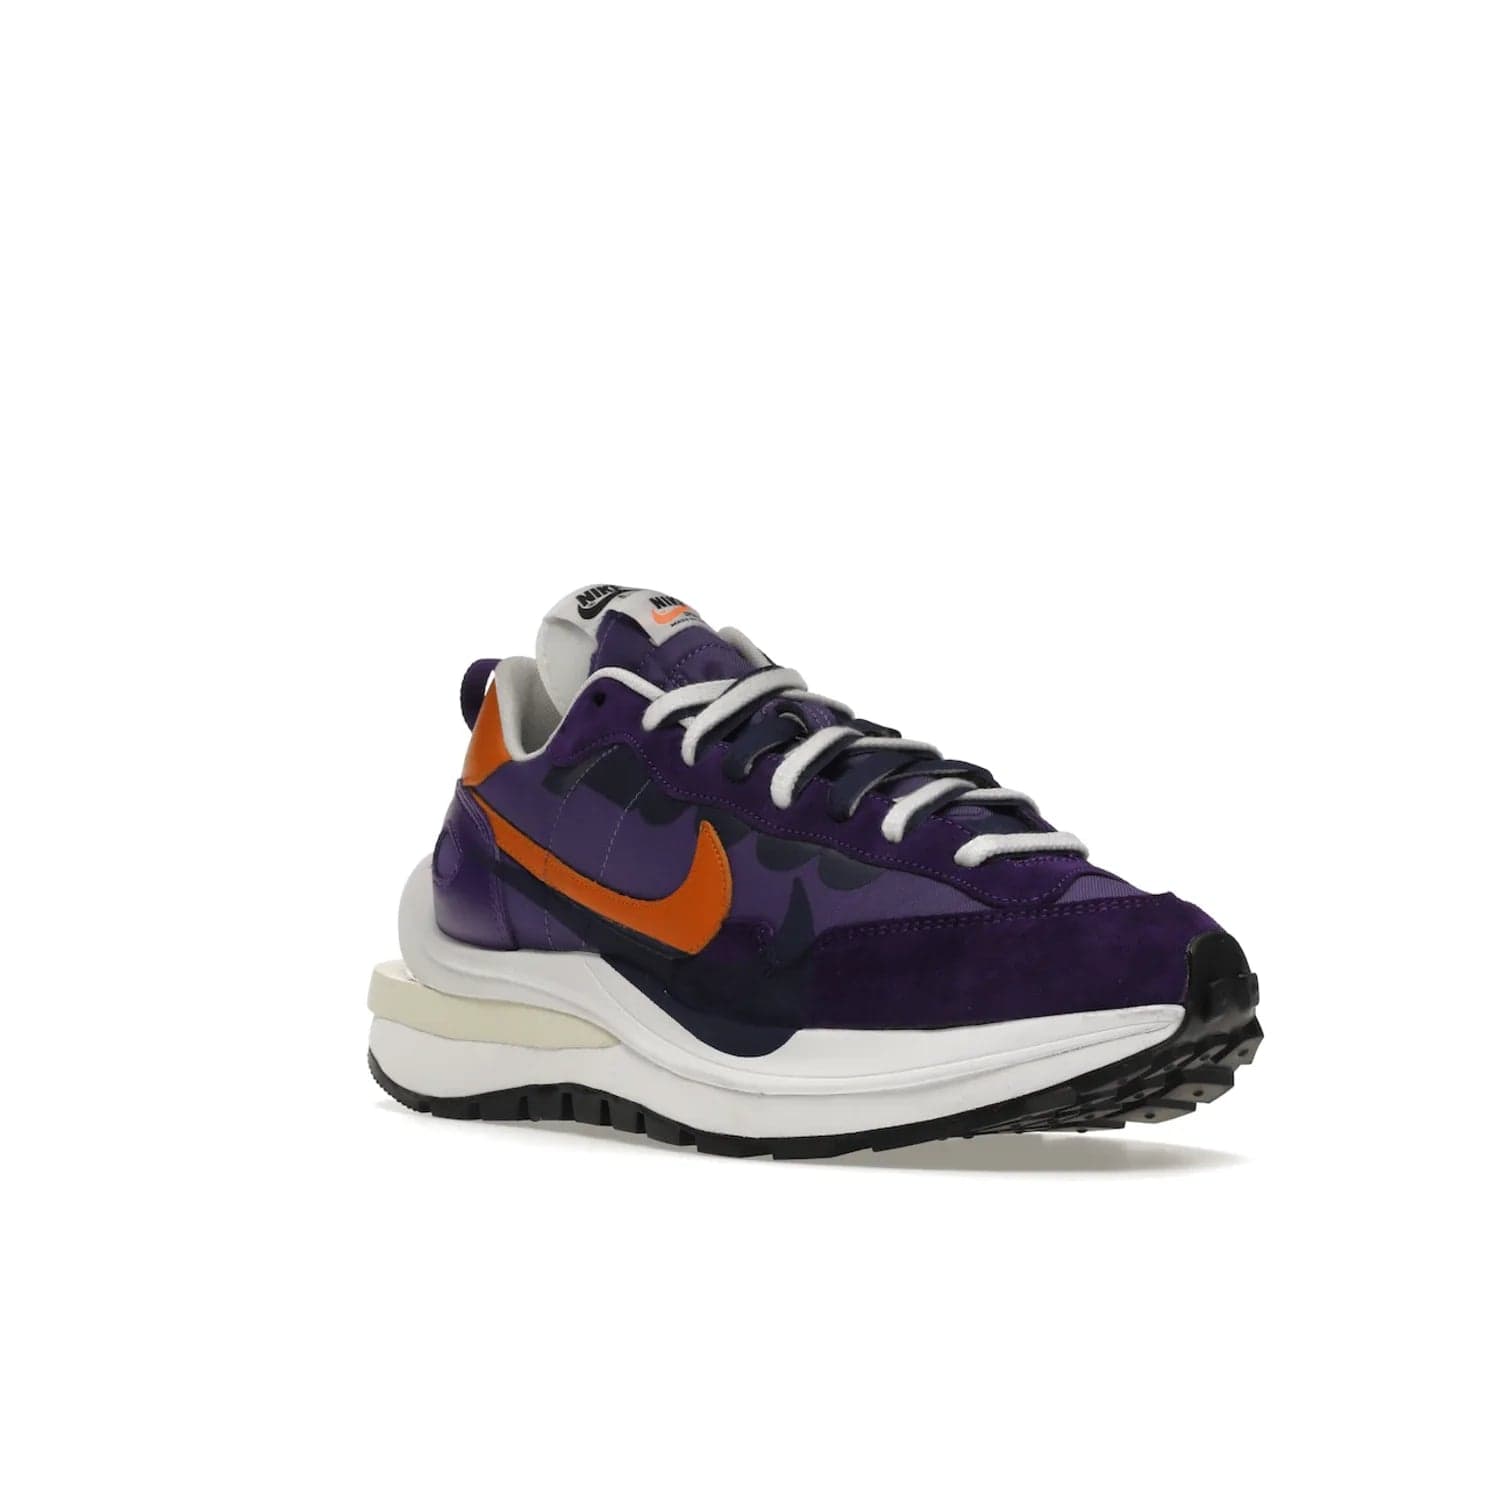 Nike Vaporwaffle sacai Dark Iris - Image 6 - Only at www.BallersClubKickz.com - Unique Nike Vaporwaffle sacai Dark Iris collab. Suede, leather & textile upper with Orange accents. Dual tongues & midsoles. Woven labels & heel tabs branding. Colorway of Purple, Orange, White & Black. Must-have for any wardrobe.